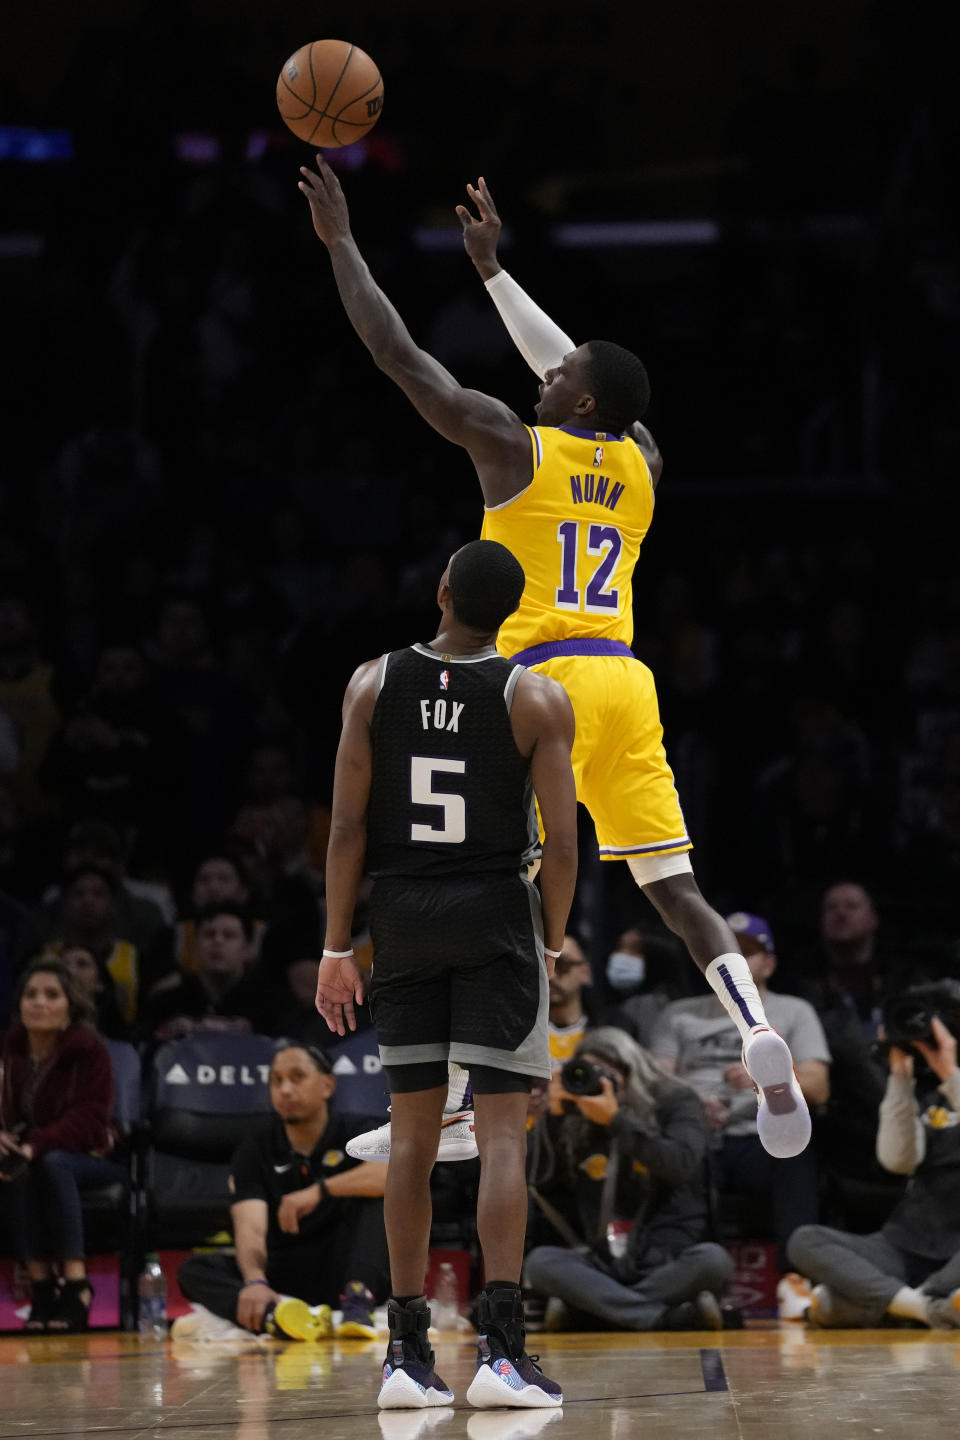 Los Angeles Lakers guard Kendrick Nunn (12) shoots a 3-pointer against Sacramento Kings guard De'Aaron Fox (5) during the second half of an NBA basketball game in Los Angeles, Wednesday, Jan. 18, 2023. (AP Photo/Ashley Landis)